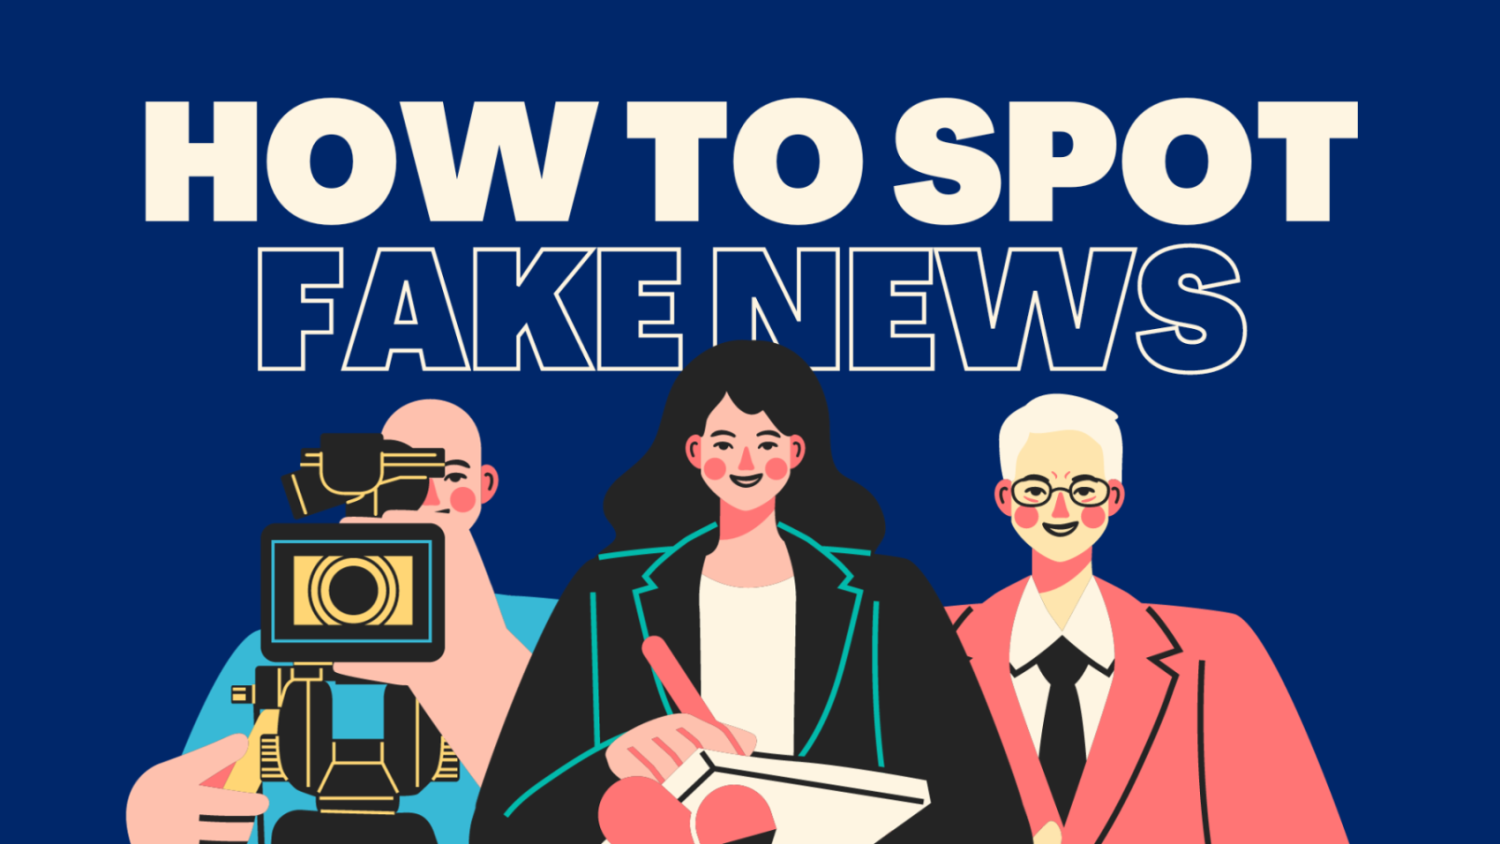 Are you falling for Fake News?